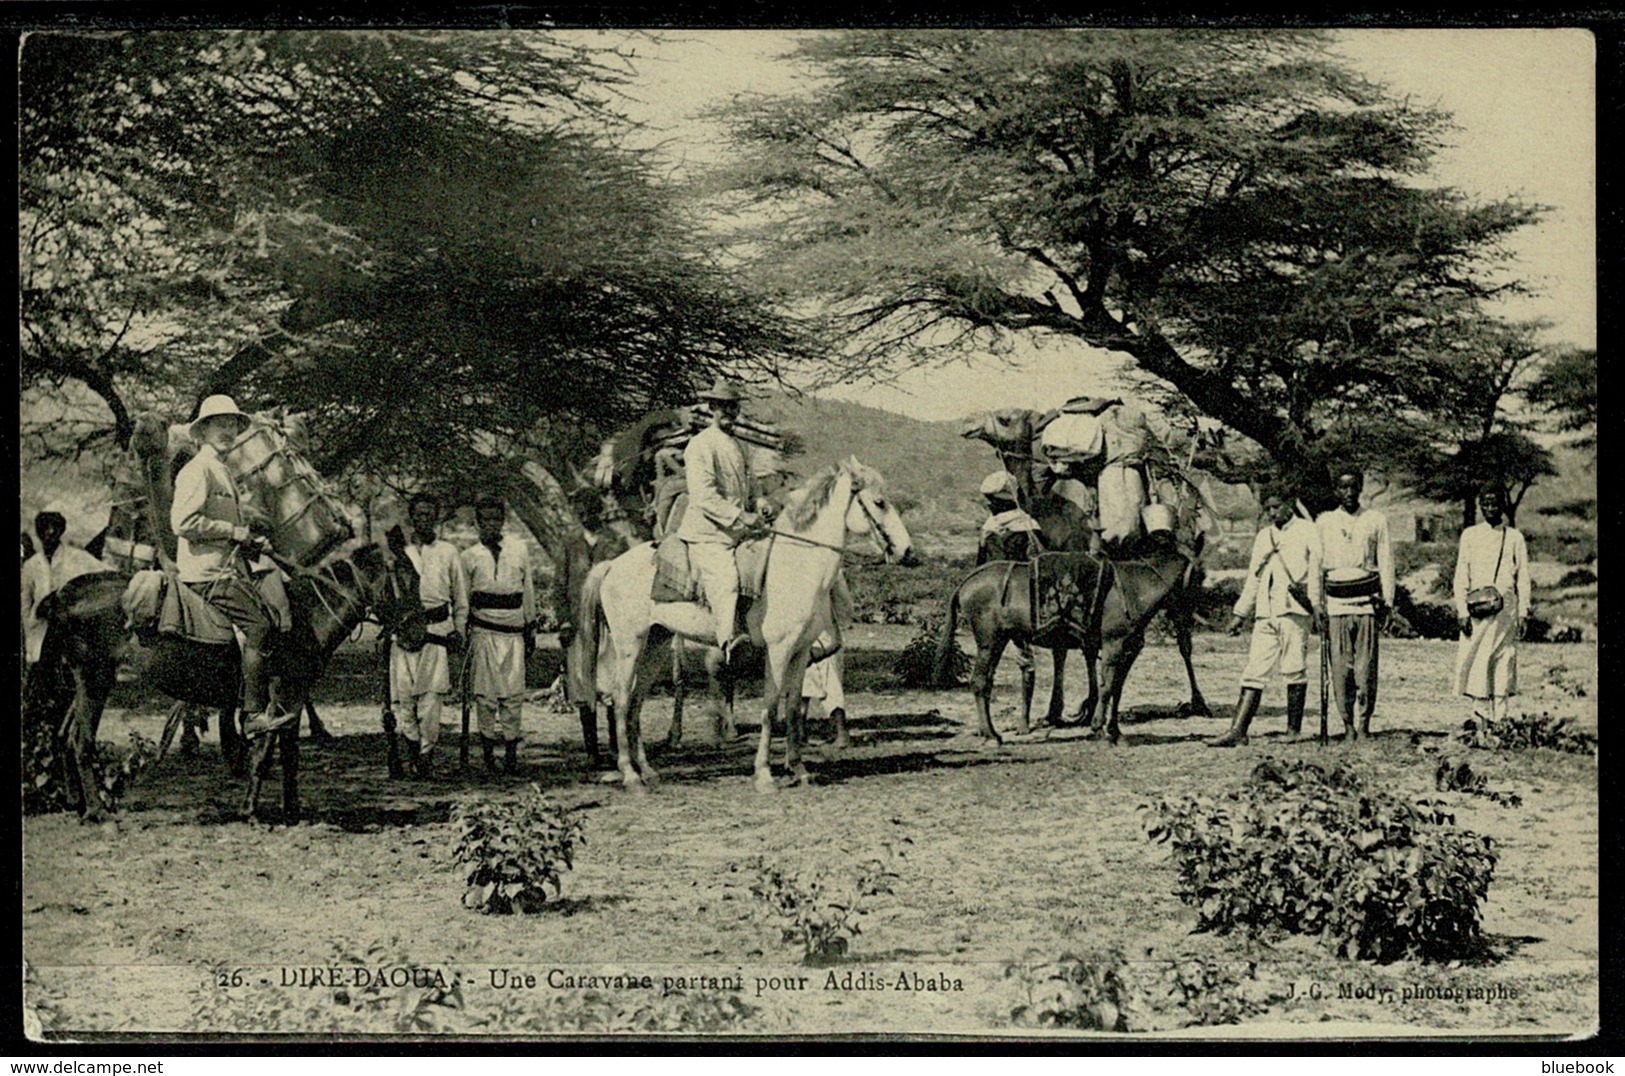 Ref 1273 - Early Postcard - Expedition Group - Dire-Daoua On Way To Addis-Ababa Ethiopia - Ethiopia